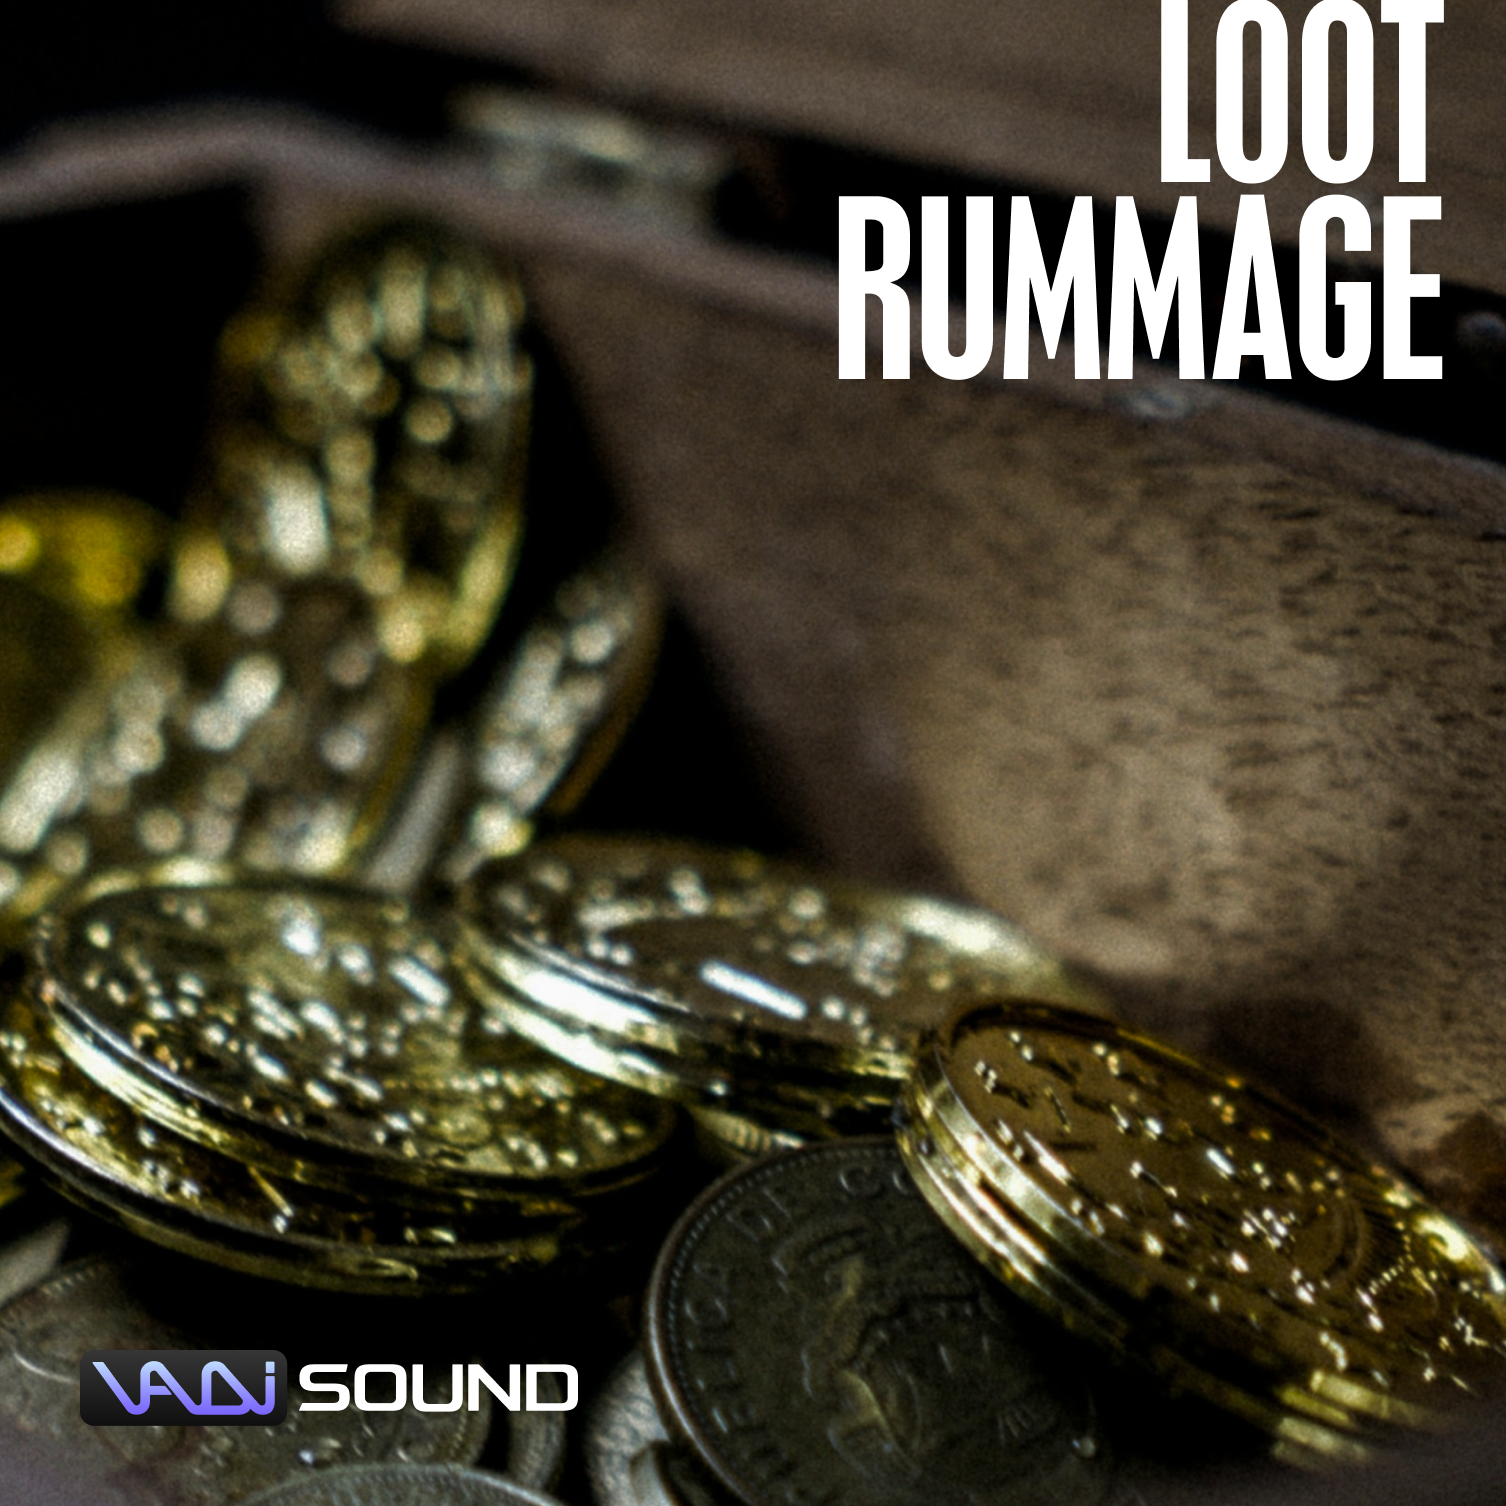 Discover the fascinating world of sound effects library: Loot Rummage by Nai Sound at Sonniss.